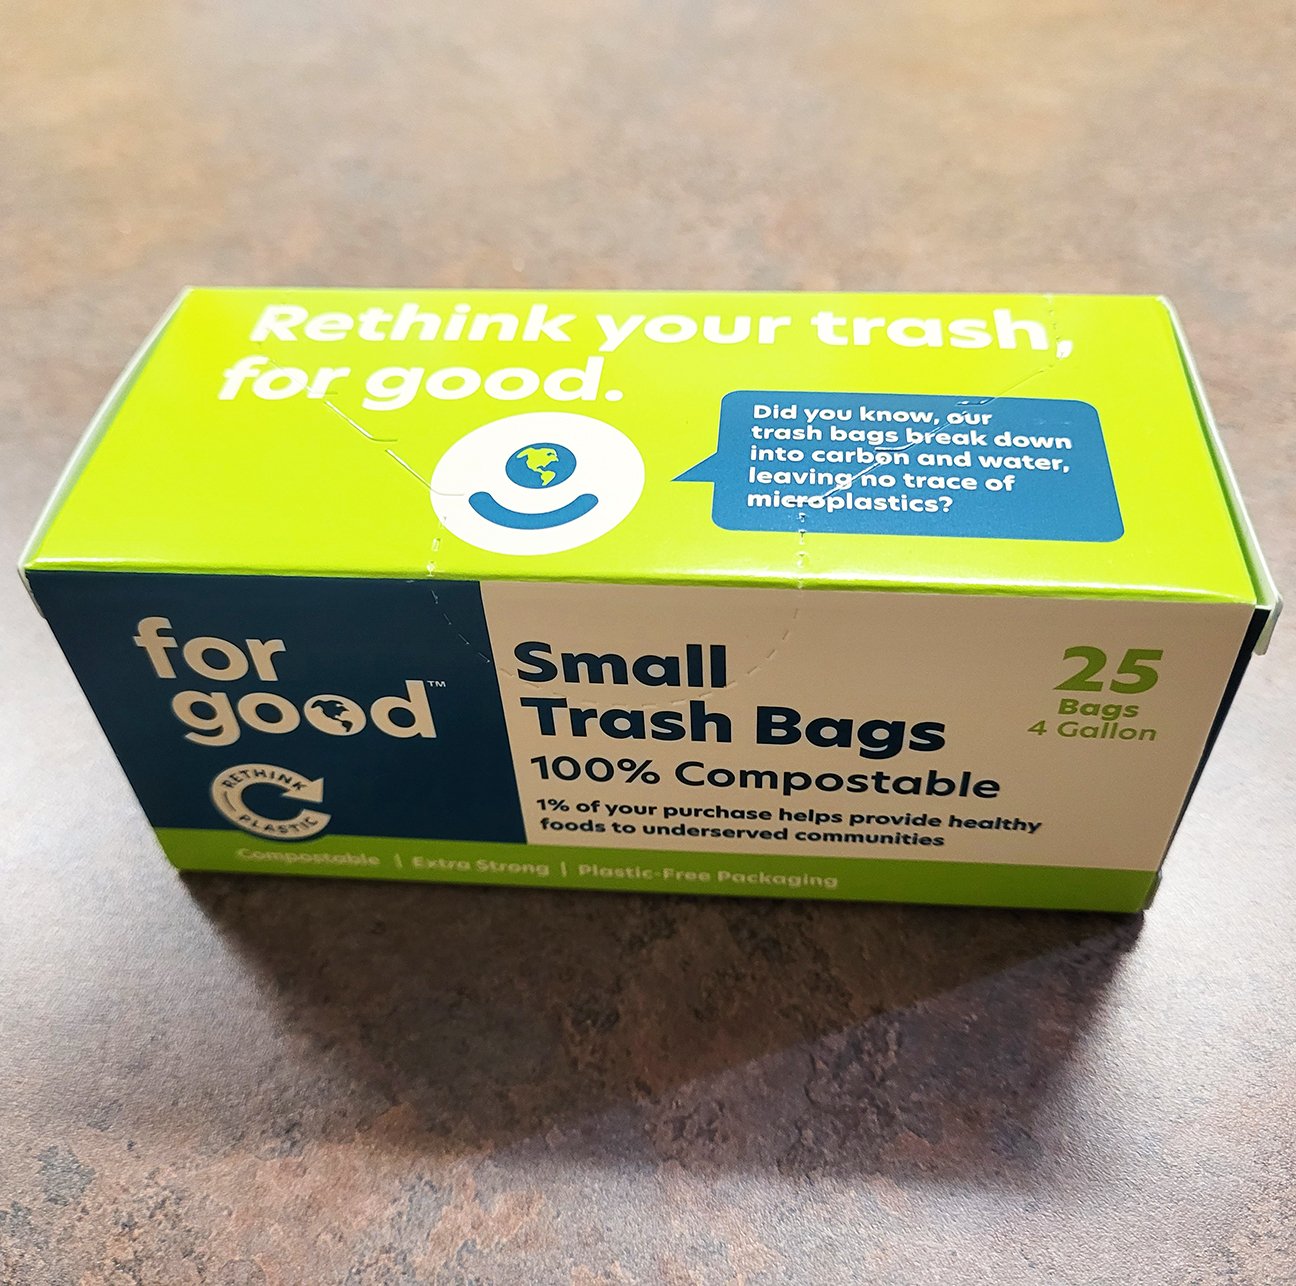 My box of garbage bags reminds you when you're almost out. Neat. : r /mildlyinteresting